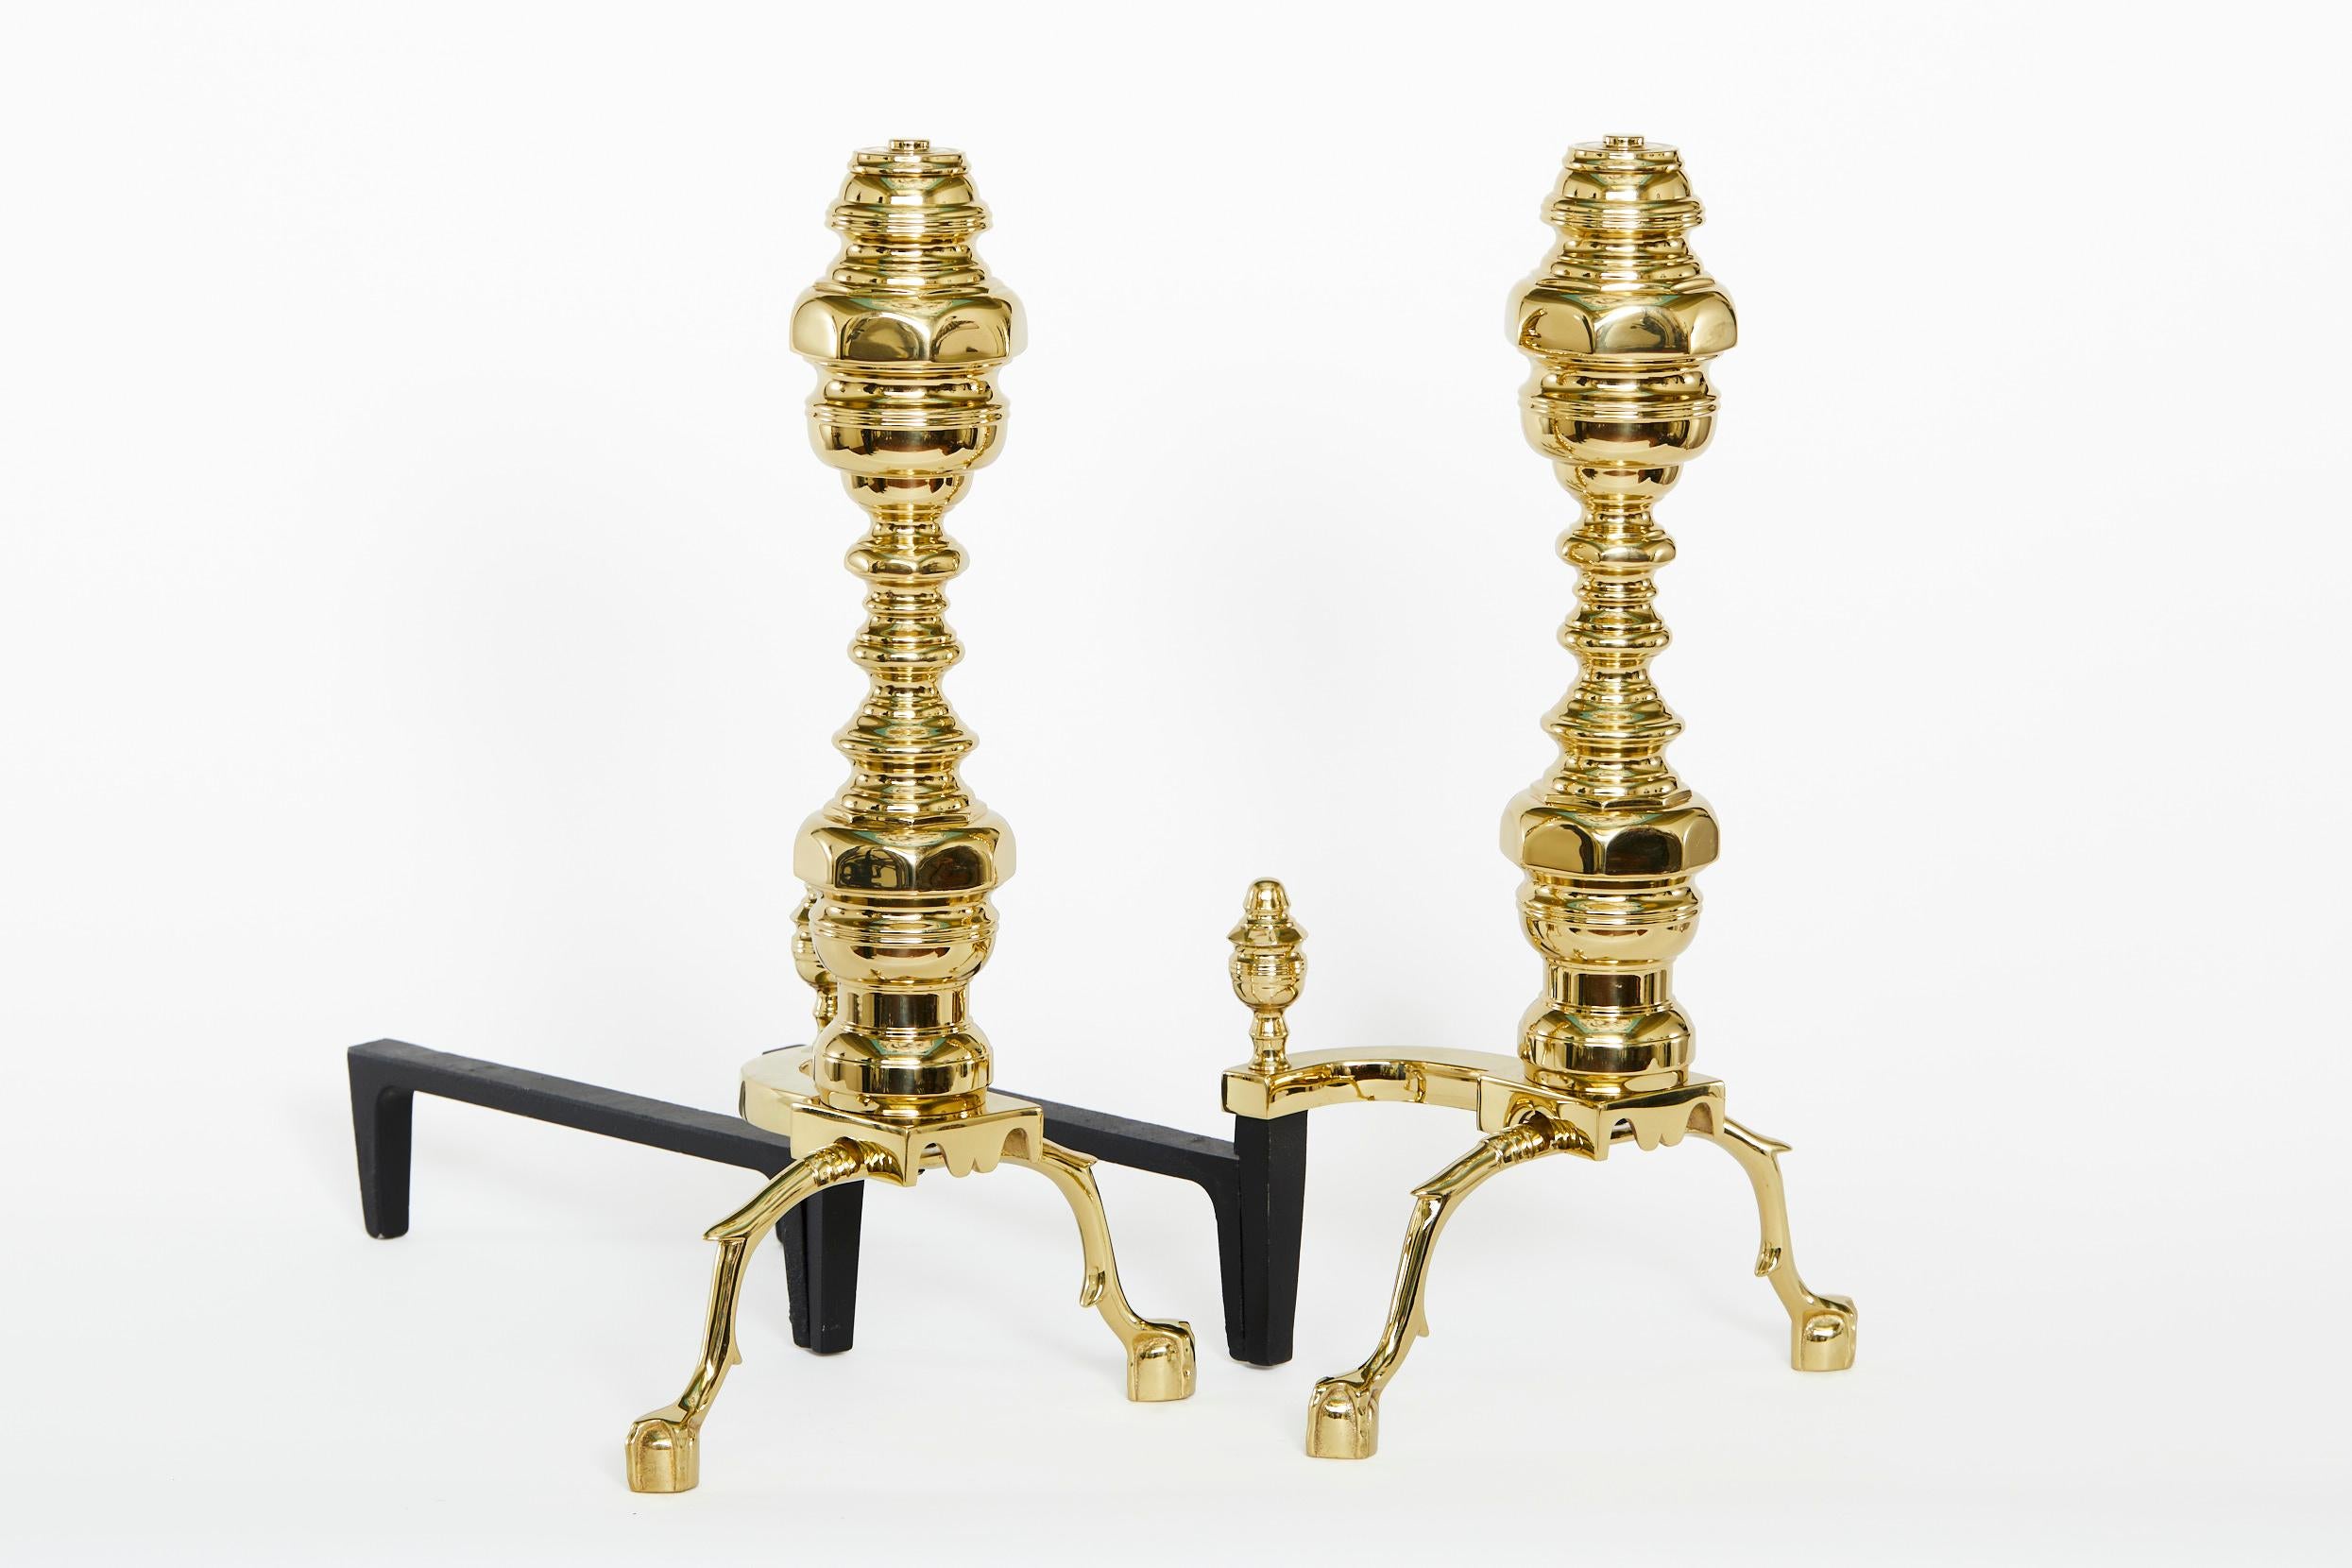 Very large gilt solid brass Georgian style pair andirons with design details feet and urn finial design top. Each andiron is in great condition. Minor wear. Each one measures 23.5 inches high X 13 inches wide X 21.5 inches deep.